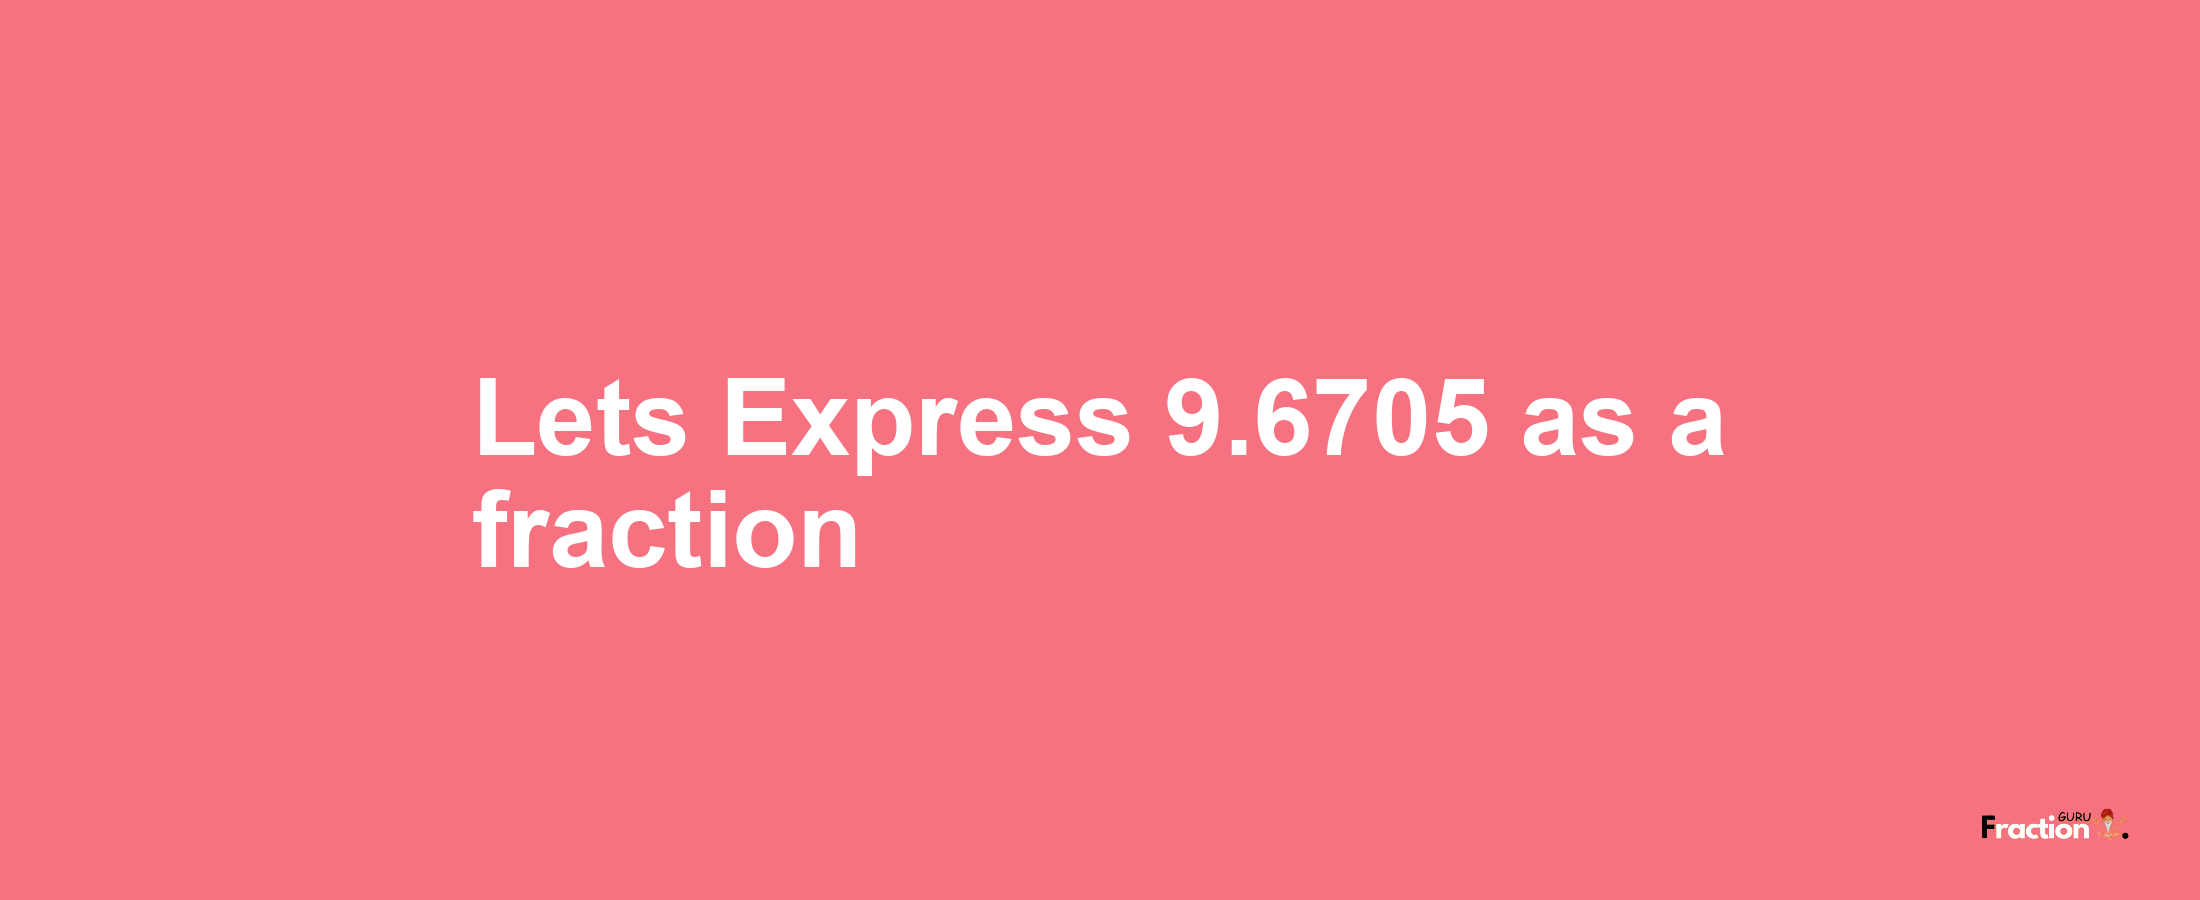 Lets Express 9.6705 as afraction